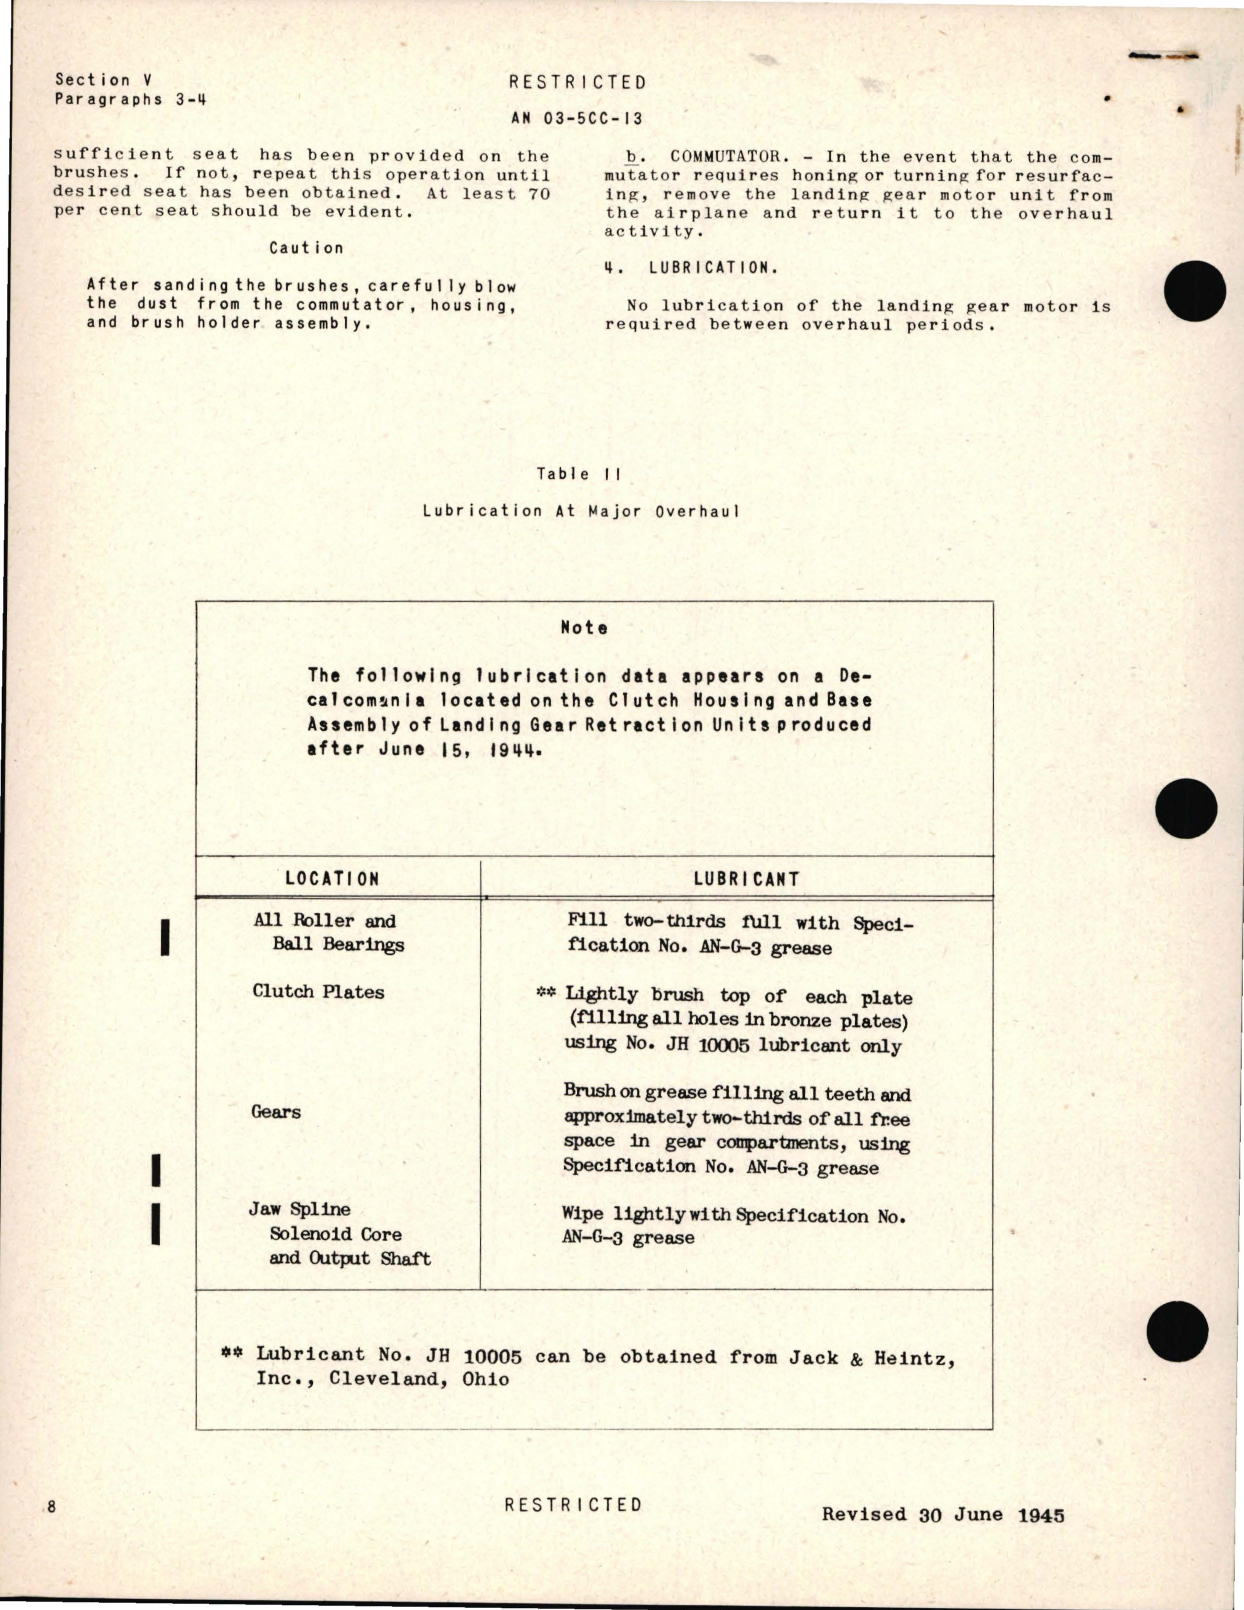 Sample page 6 from AirCorps Library document: Operation, Service, and Overhaul Instructions with Parts Catalog for Landing Wheel Retracting Motor Model JH I0440